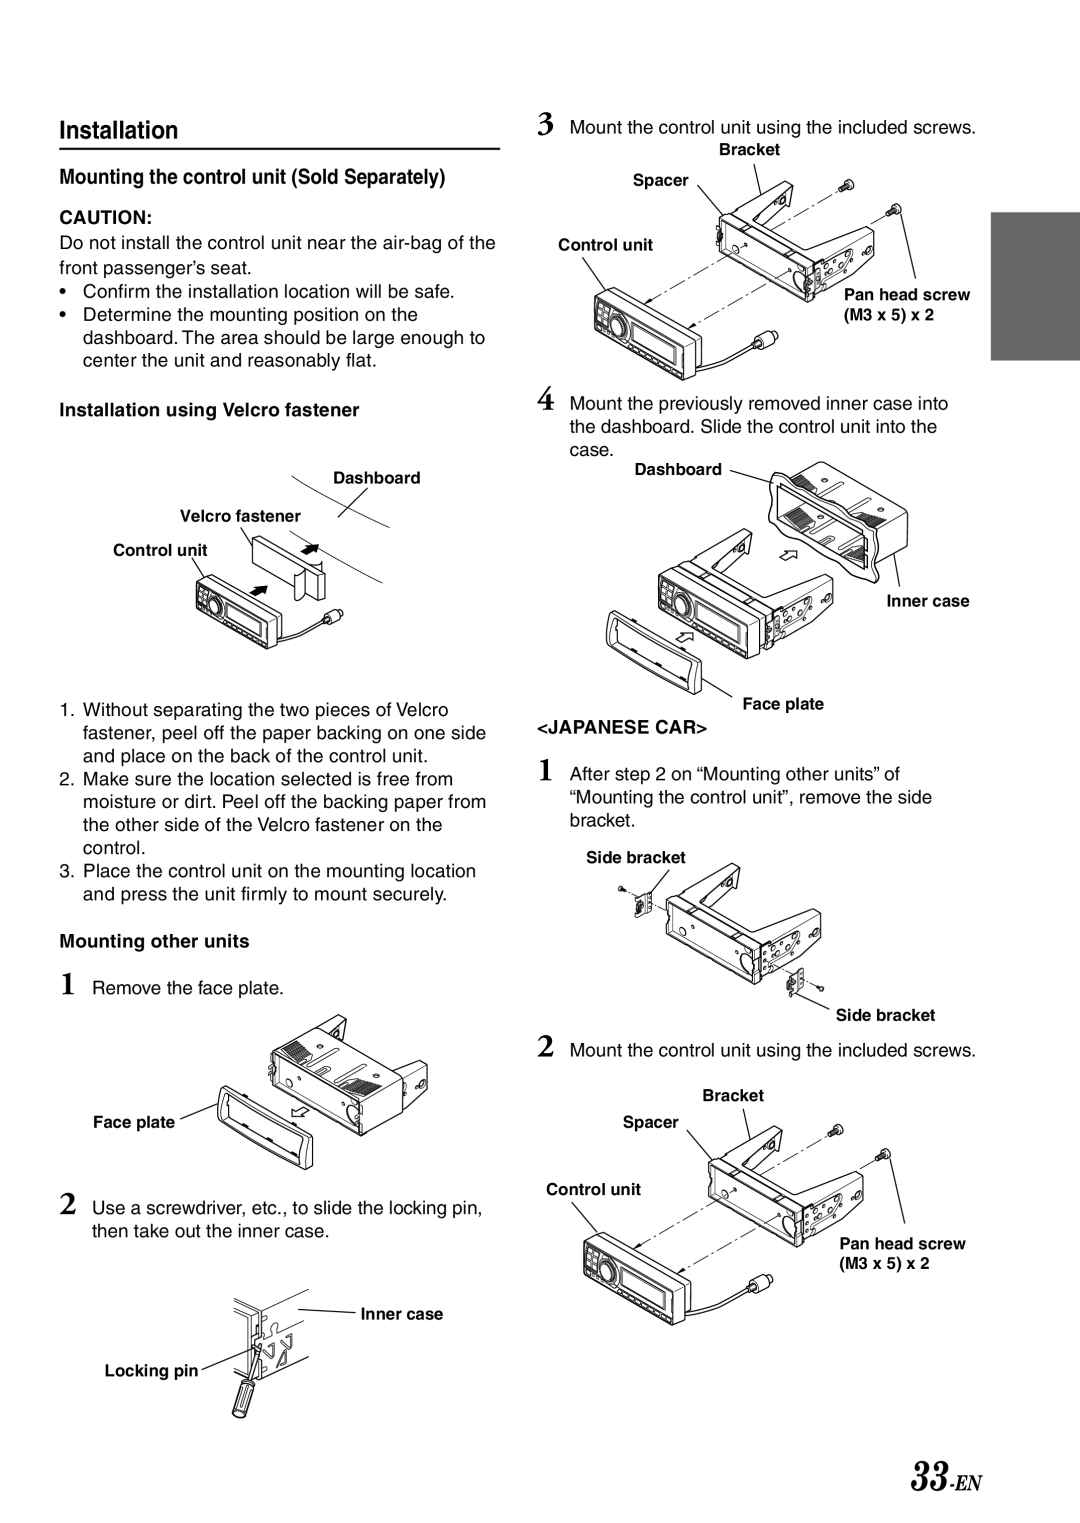 Alpine PXA-H701 owner manual 33-EN, Installation using Velcro fastener, Mounting other units, Japanese Car 